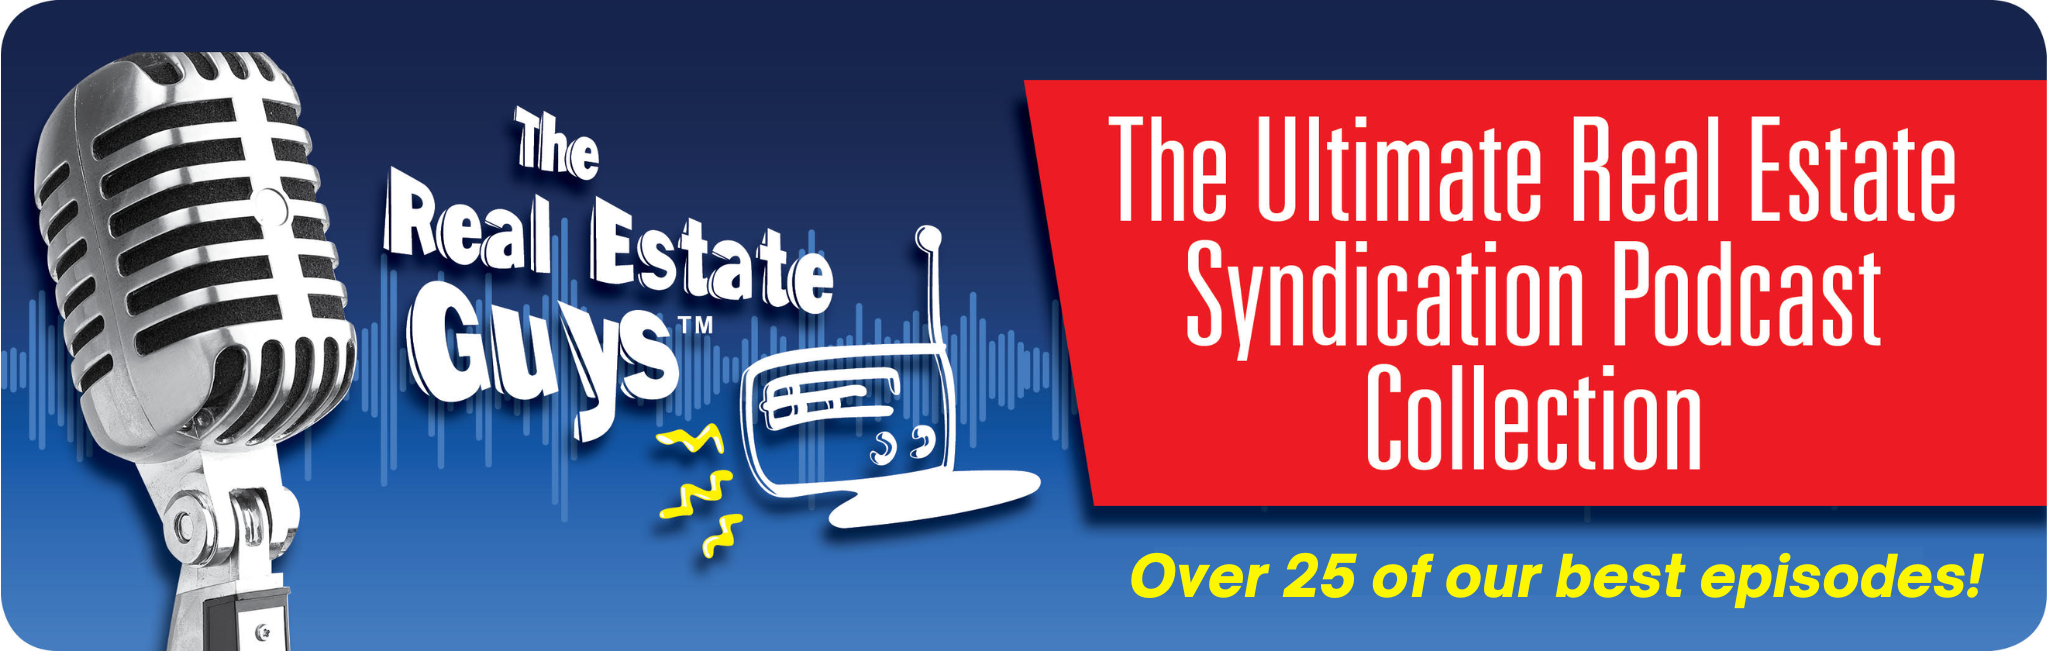 The Real Estate Guys Radio Show - The Ultimate Podcast Collection on Real Estate Syndication